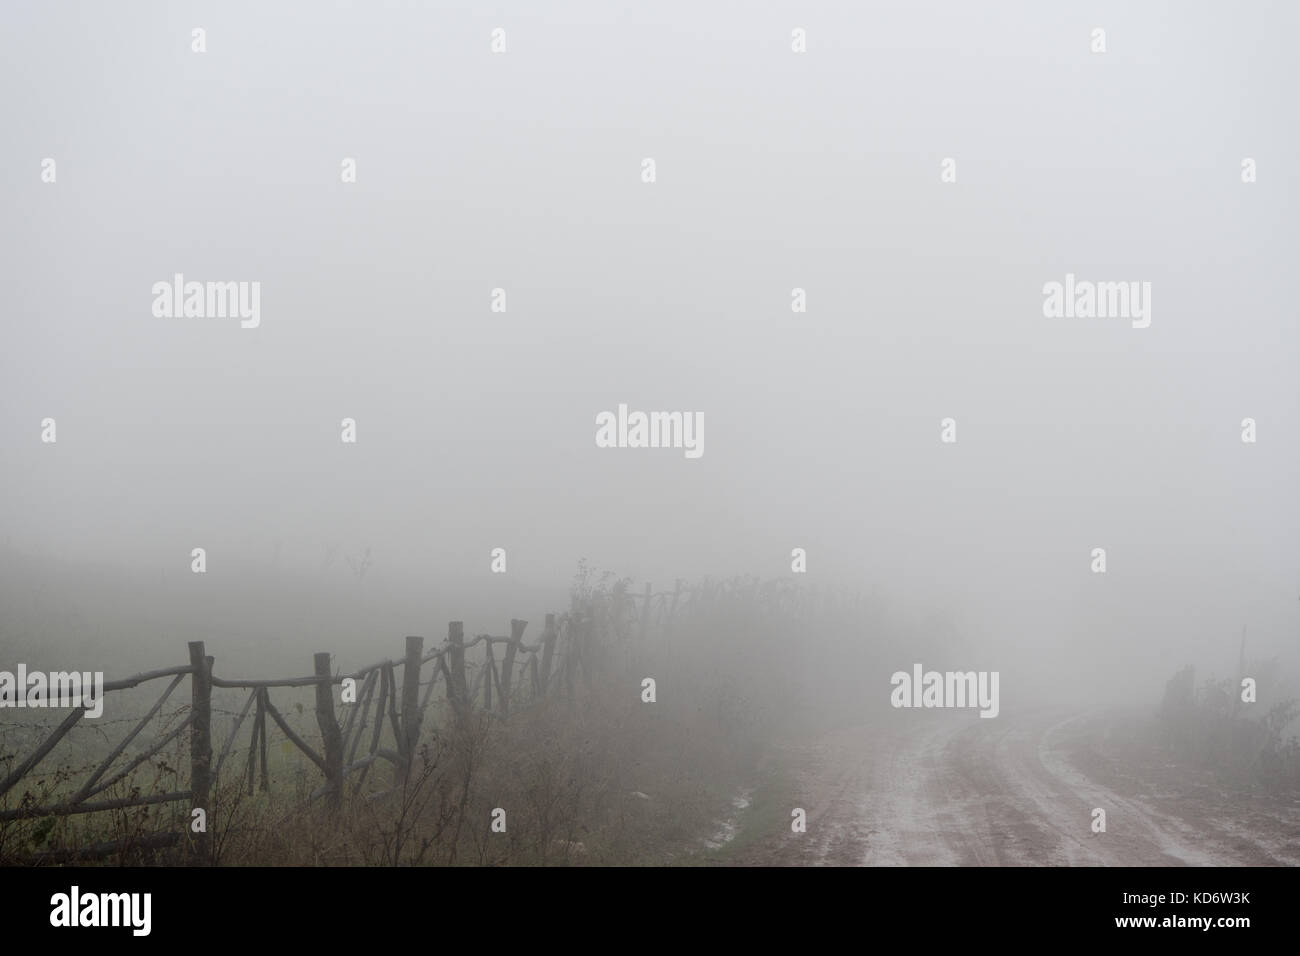 Uneven road, hedge, fog in the Armenian village horizontal Stock Photo